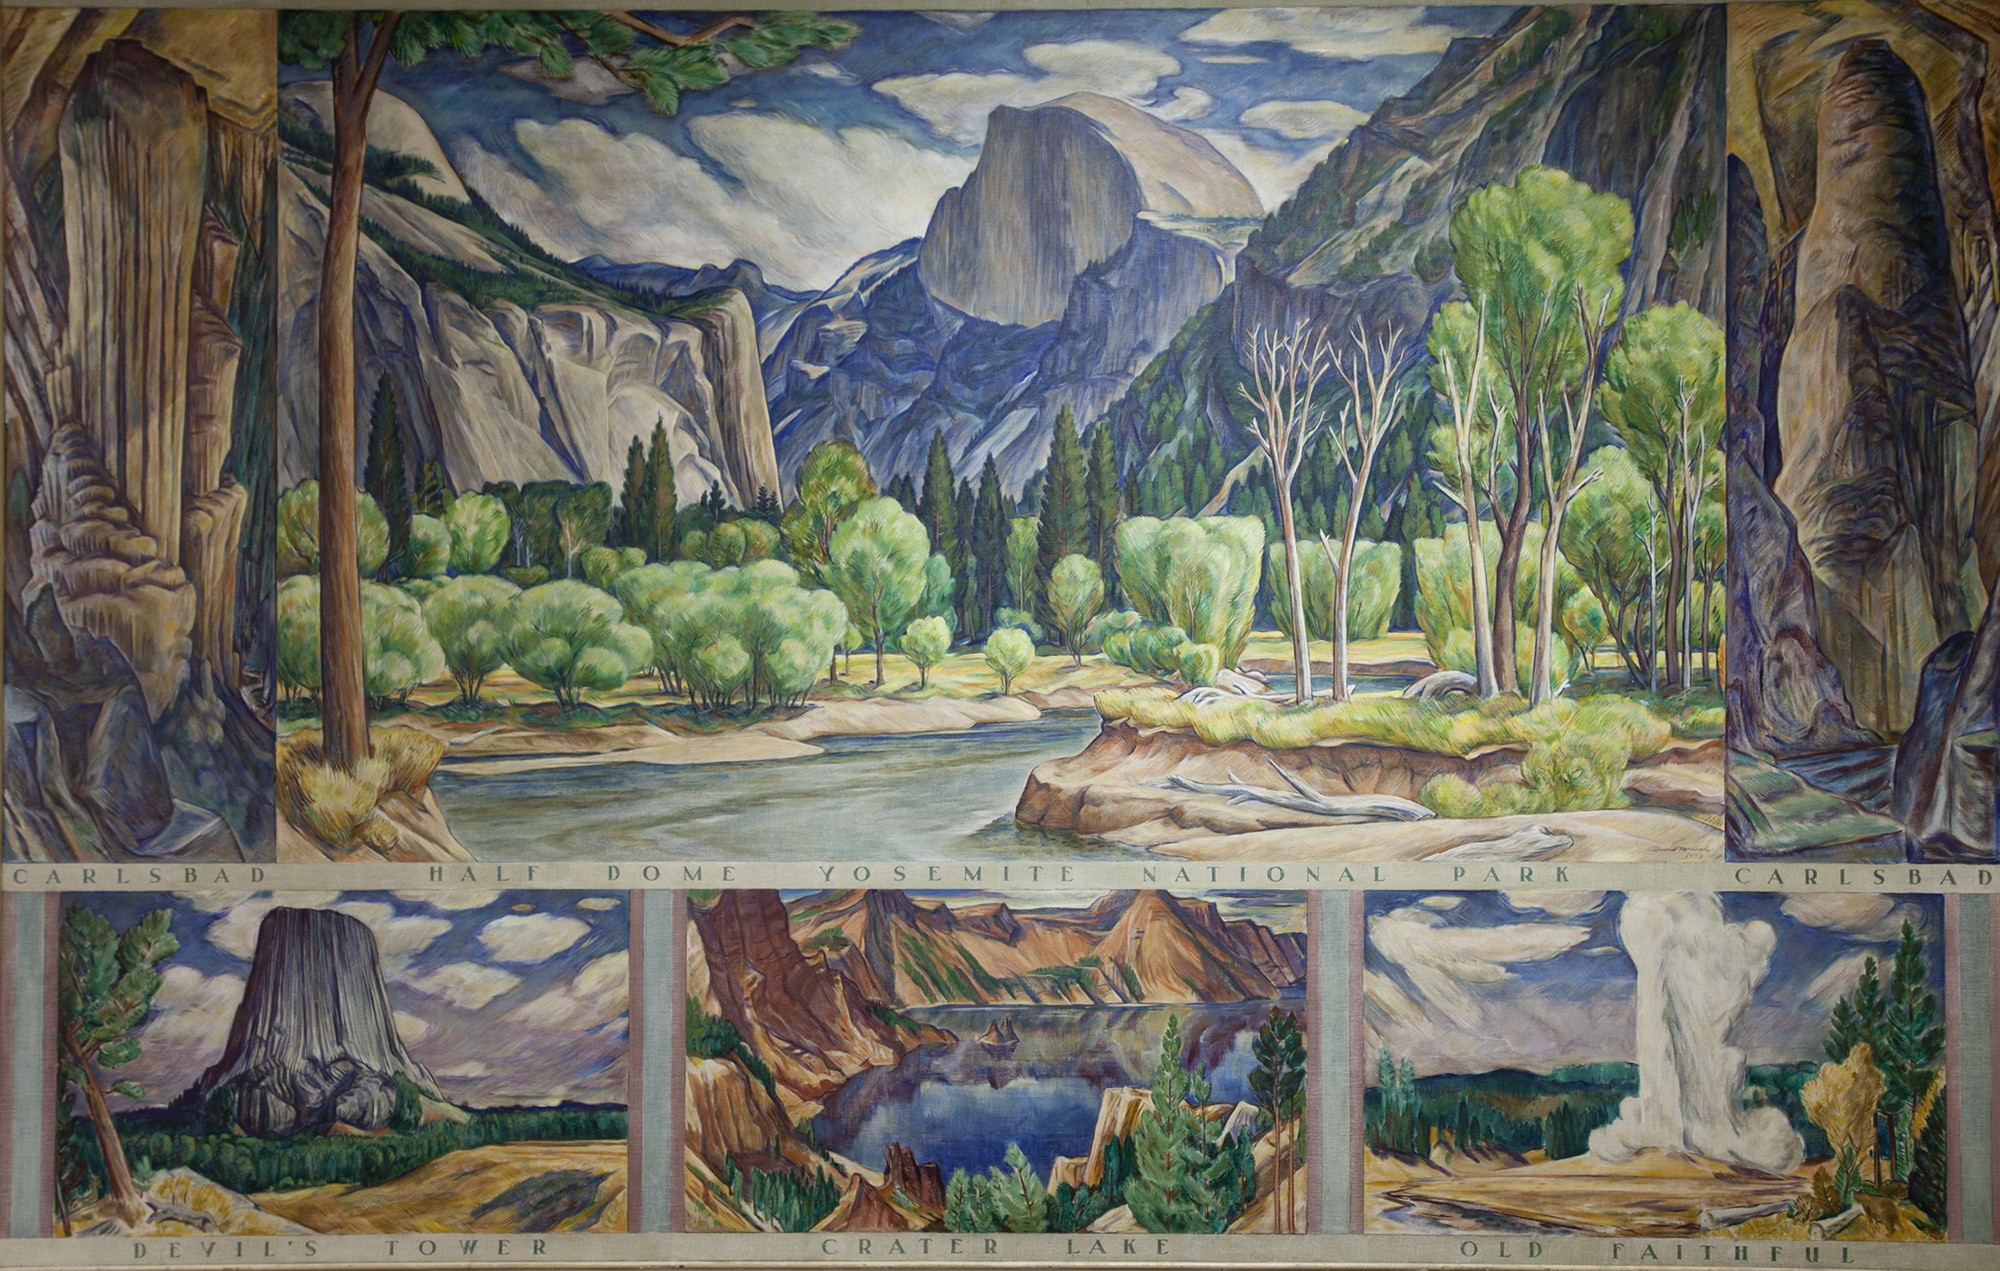 Themes of the National Parks